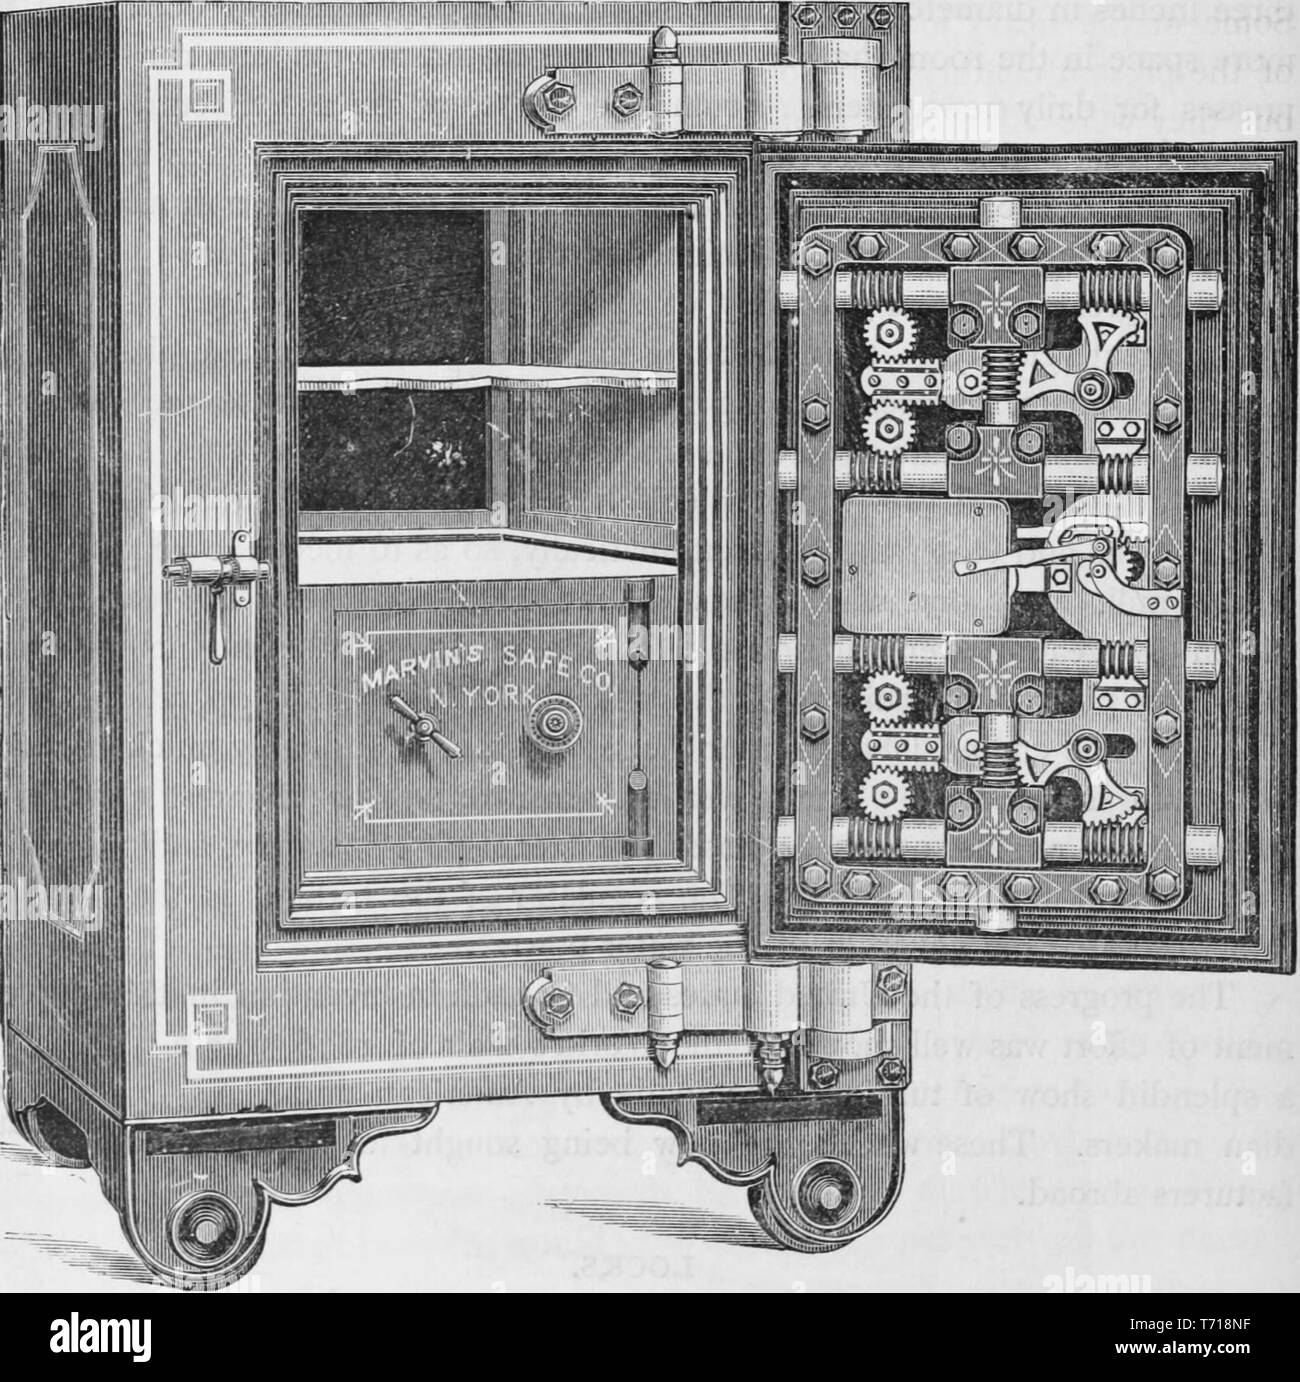 Engraving of the burglar-proof safe made by Marvin's Safe company from New York, from the book 'Industrial history of the United States, from the earliest settlements to the present time' by Albert Sidney Bolles, 1878. Courtesy Internet Archive. () Stock Photo